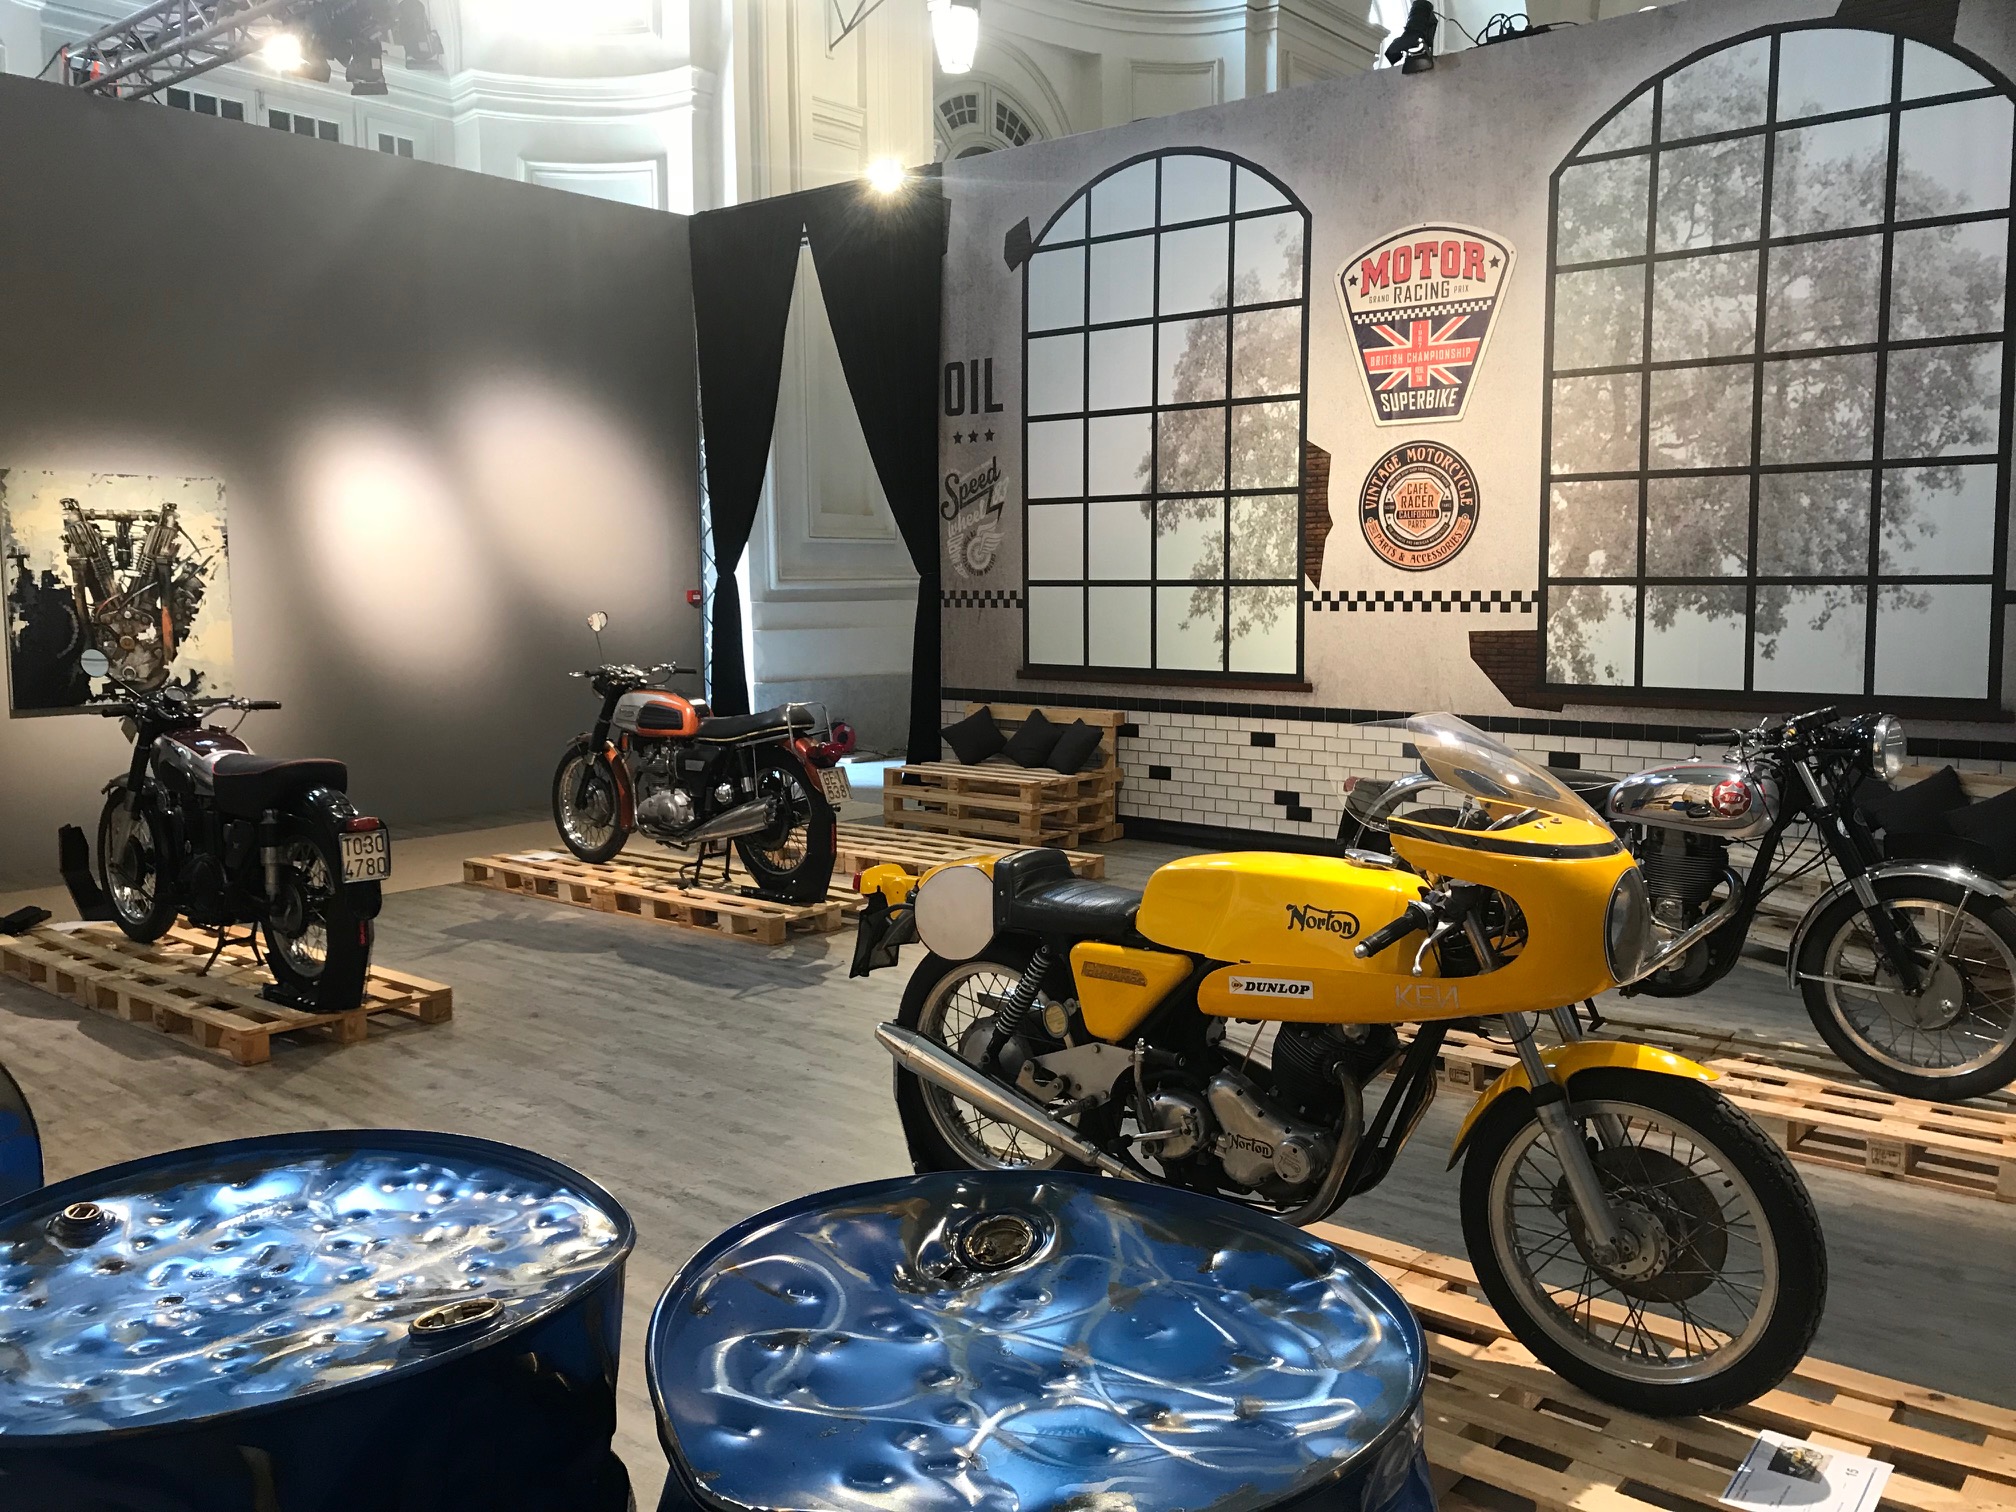 “Easy Rider. The legend of motorcycles as art “: the Motor Valley motorcycles on display at the Reggia di Venaria.